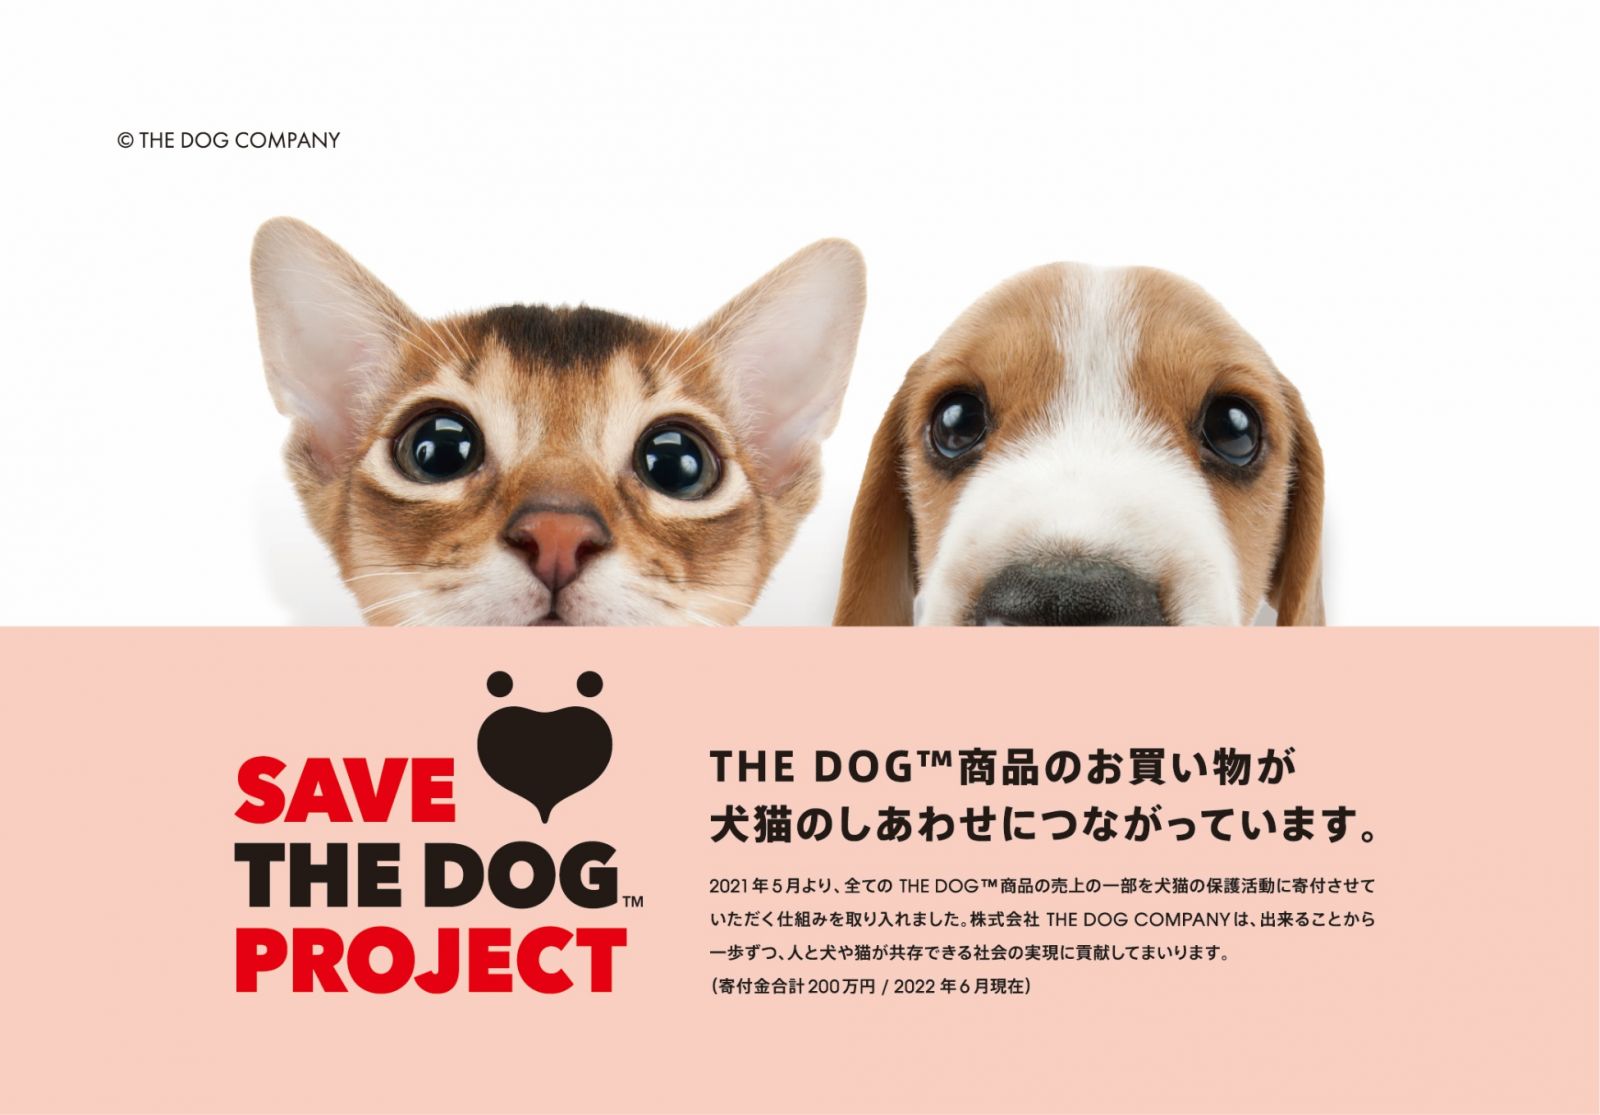 （２）SAVE THE DOG PROJECT